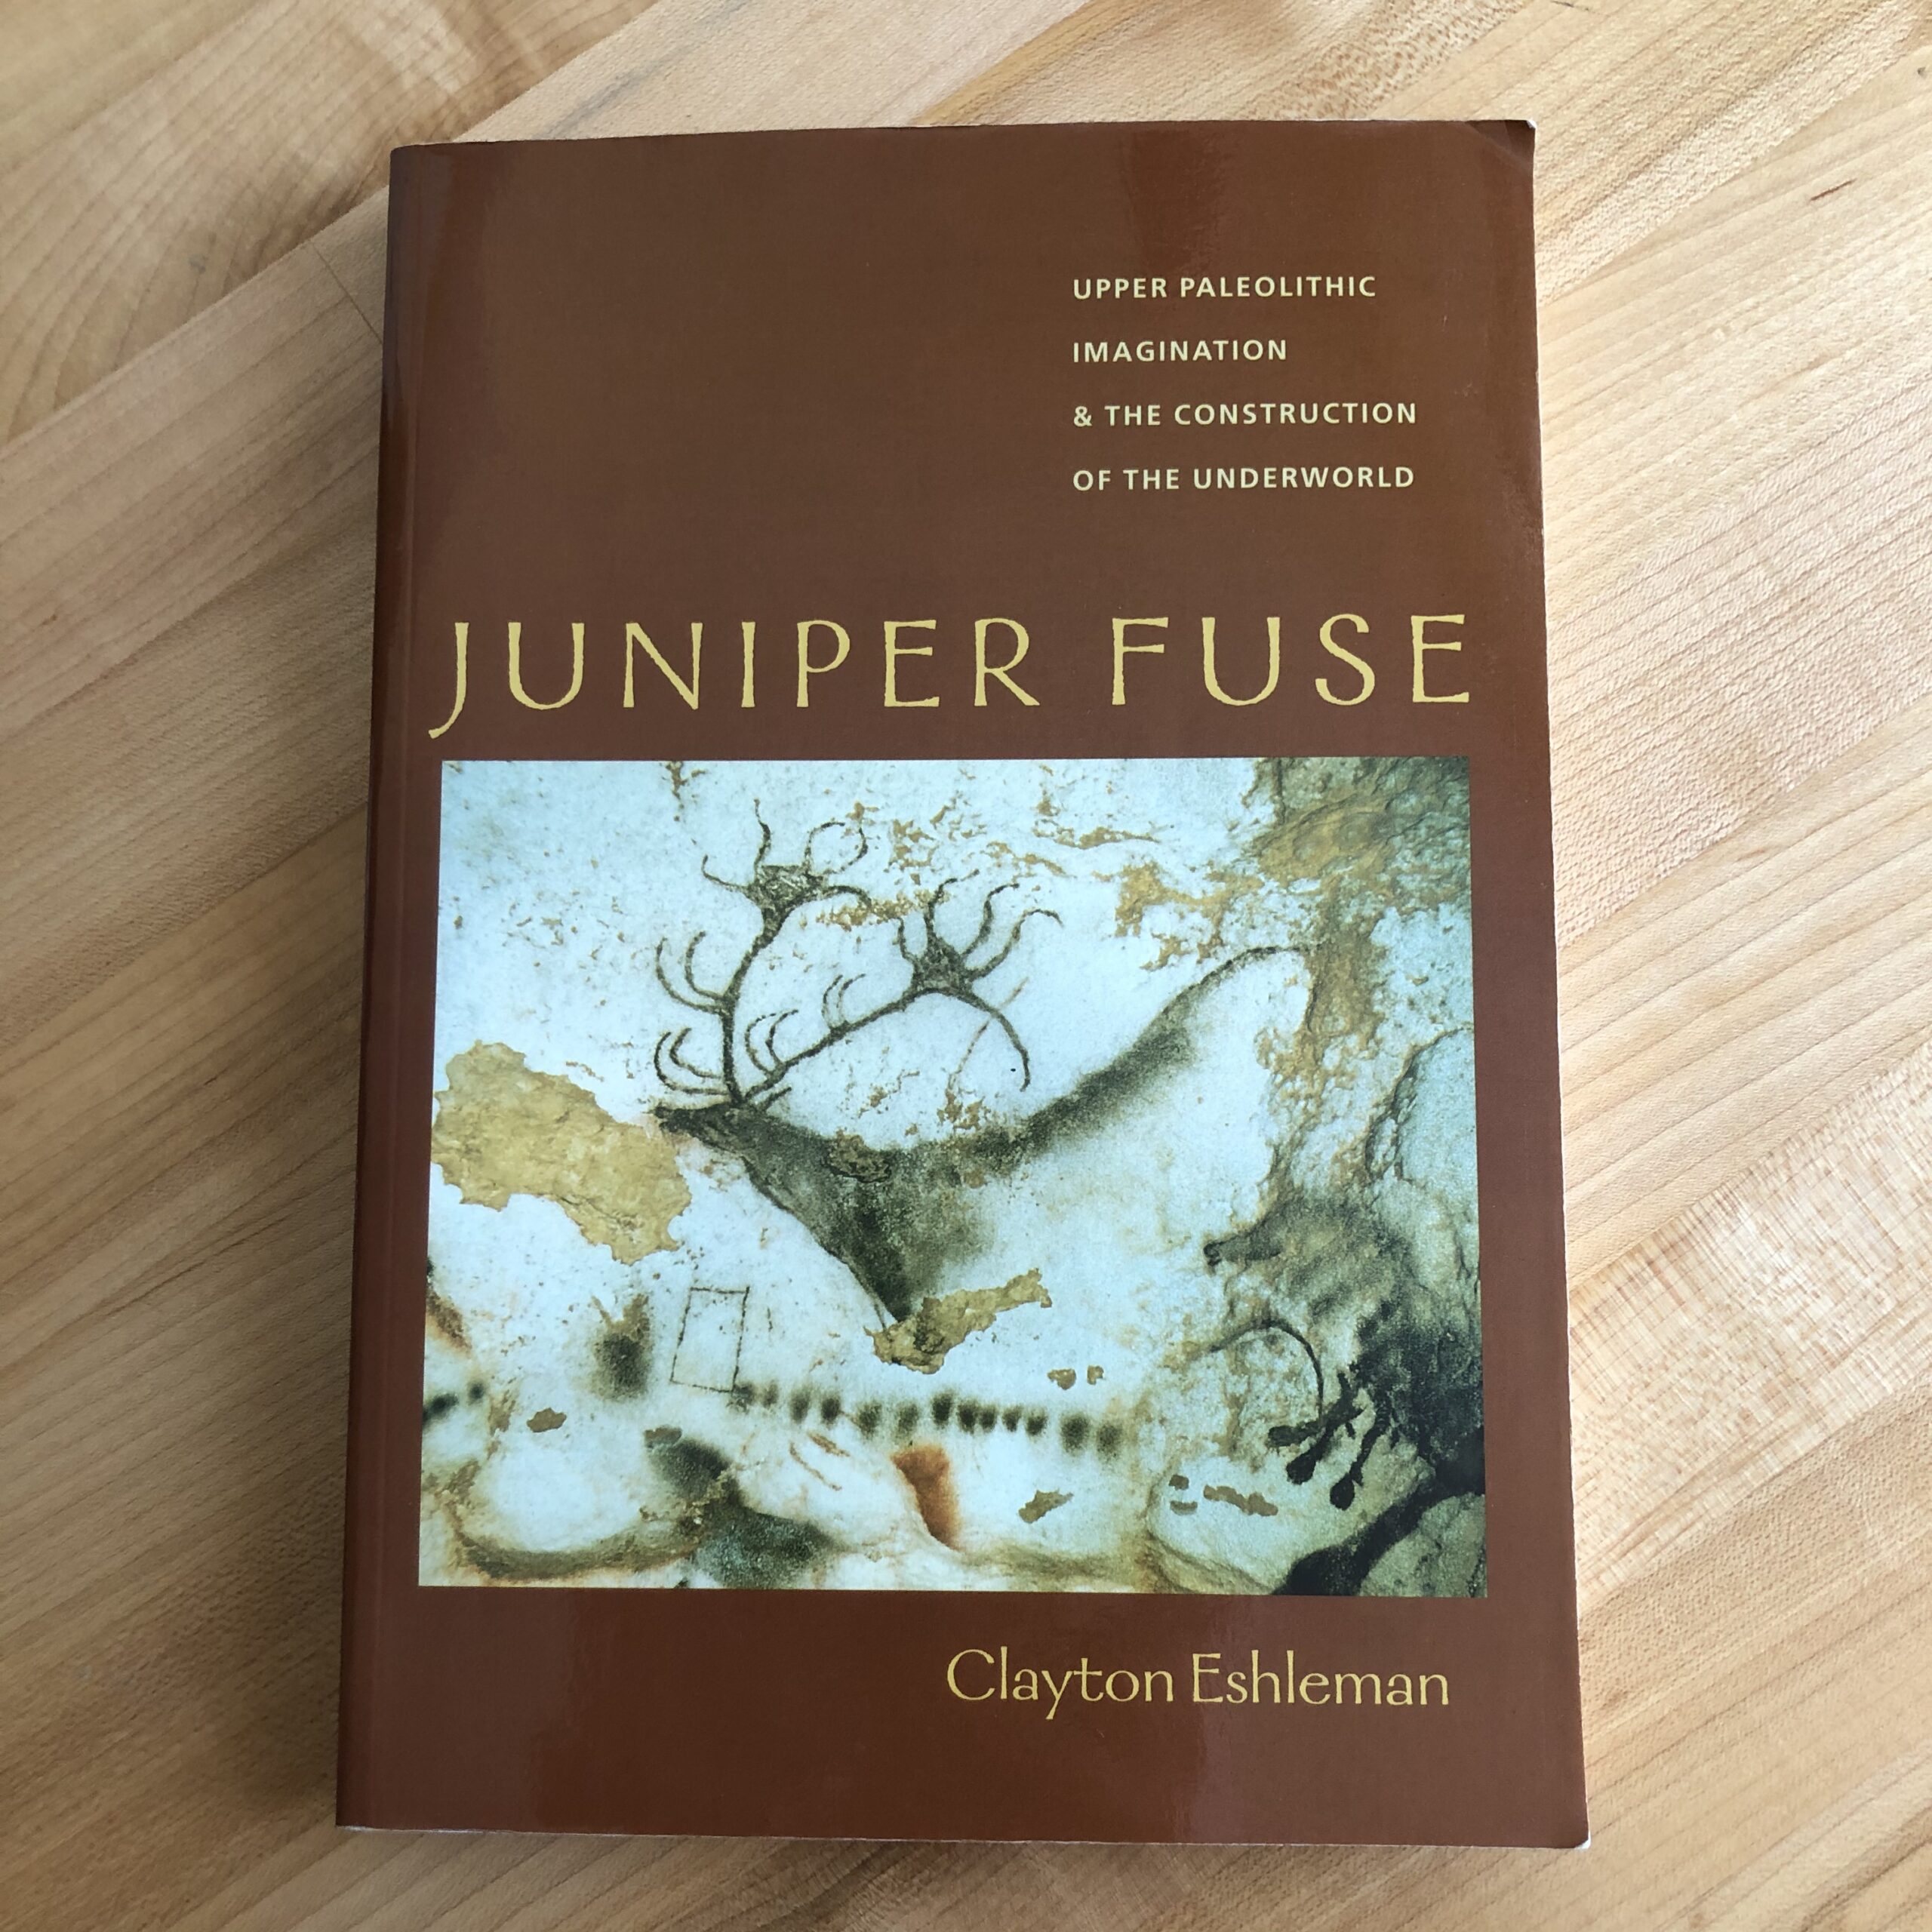 Juniper Fuse by Clayton Eshleman in paperback, lying on a maple tabletop. The brown bookcover features tan typography and a photo of a paleolithic cave painting.